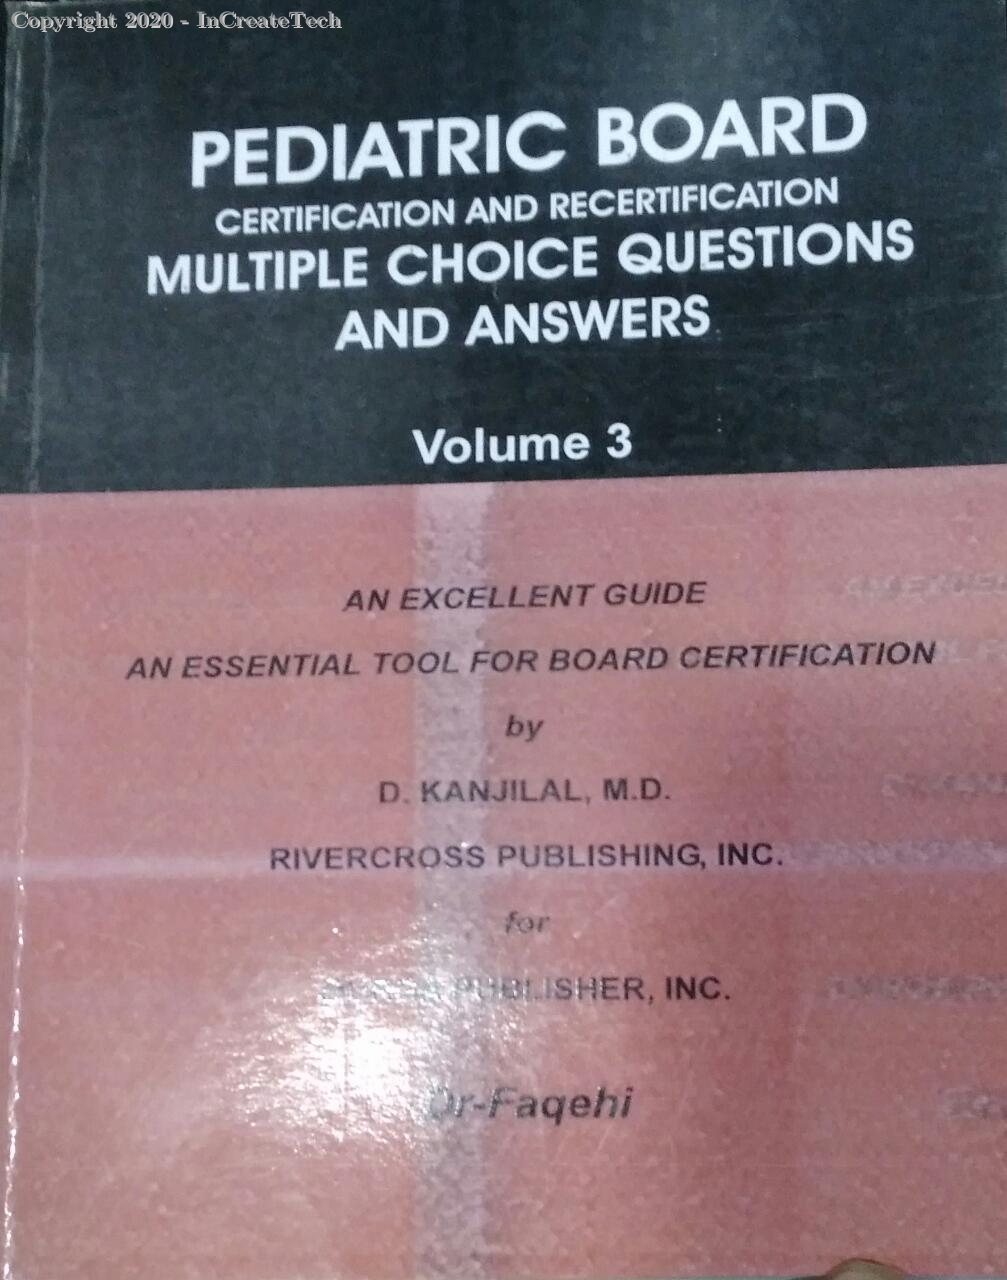 PEDIATRIC BOARD CERTIFICATION MULTIPAL CHOICE QUESTIONS AND ANSEWERS VOL 3